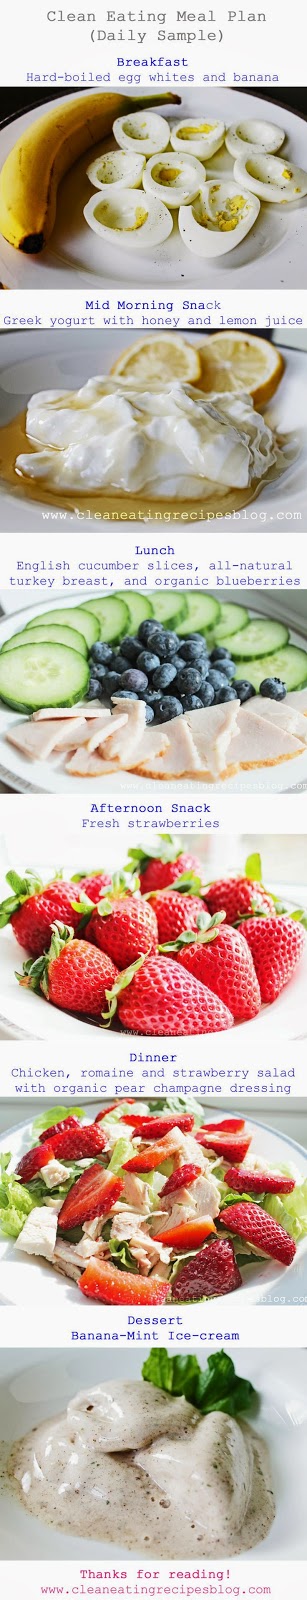 hover_share weight loss - clean eating meal plan